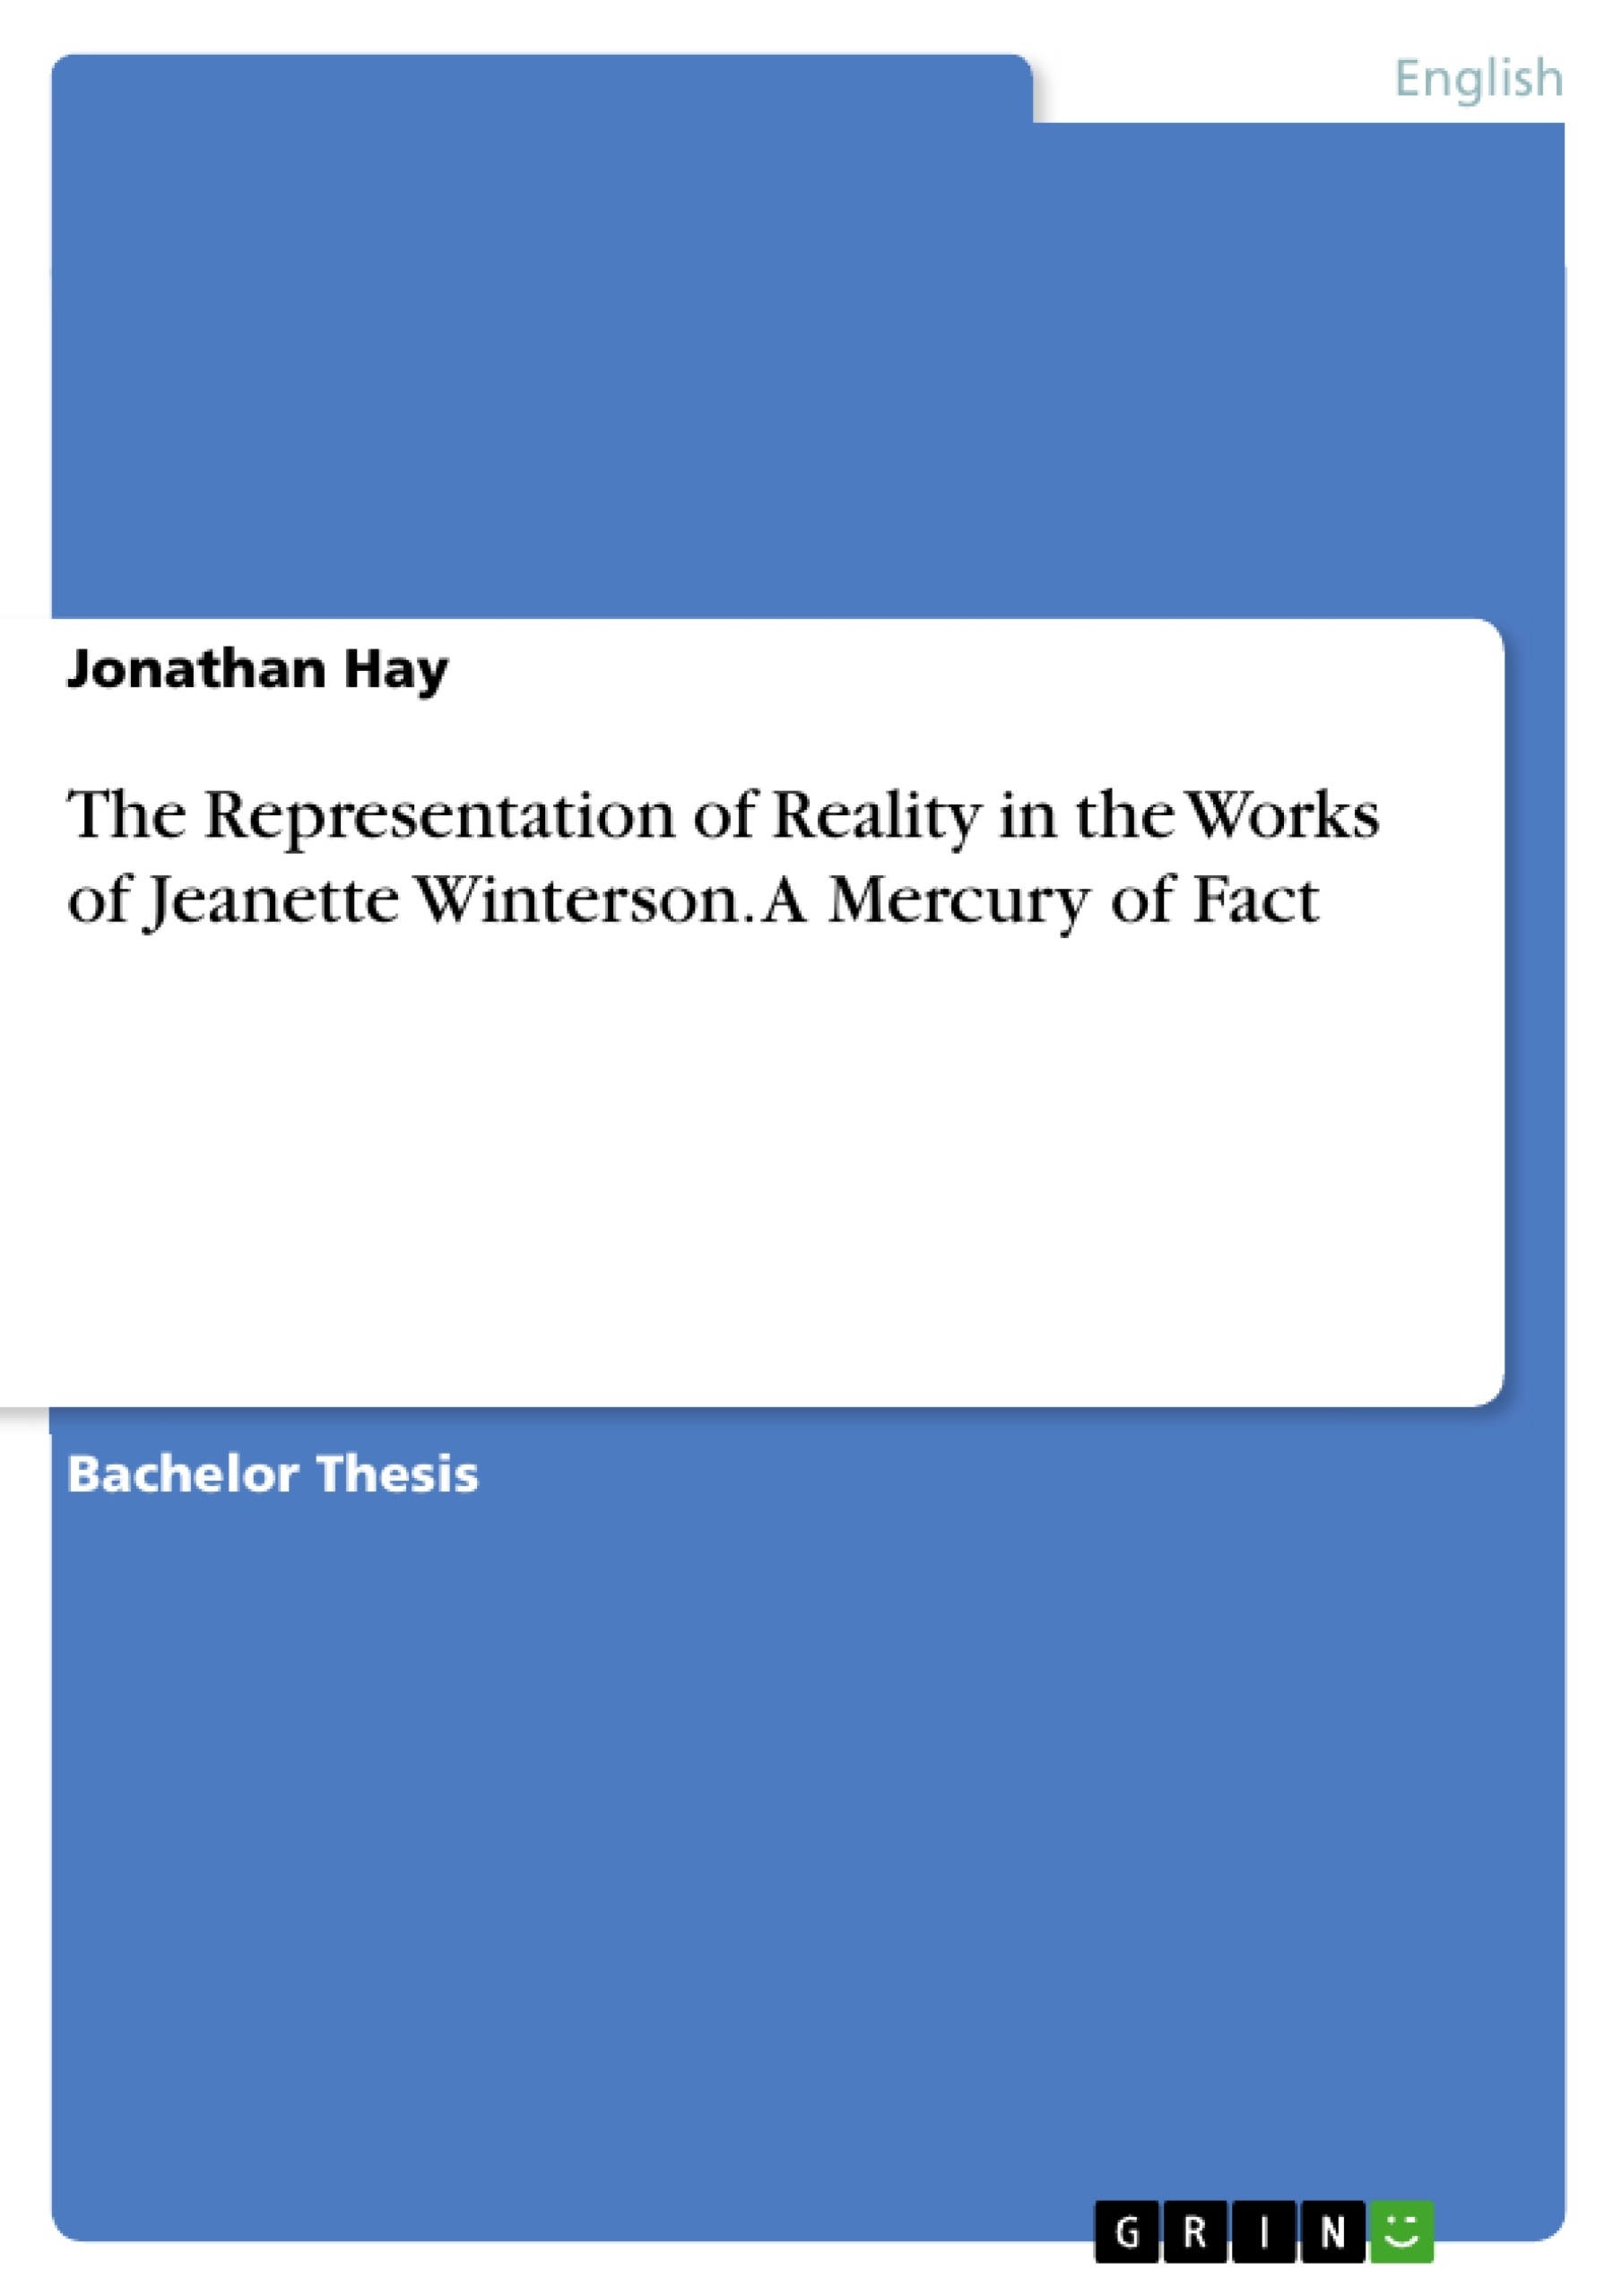 Title: The Representation of Reality in the Works of Jeanette Winterson. A Mercury of Fact